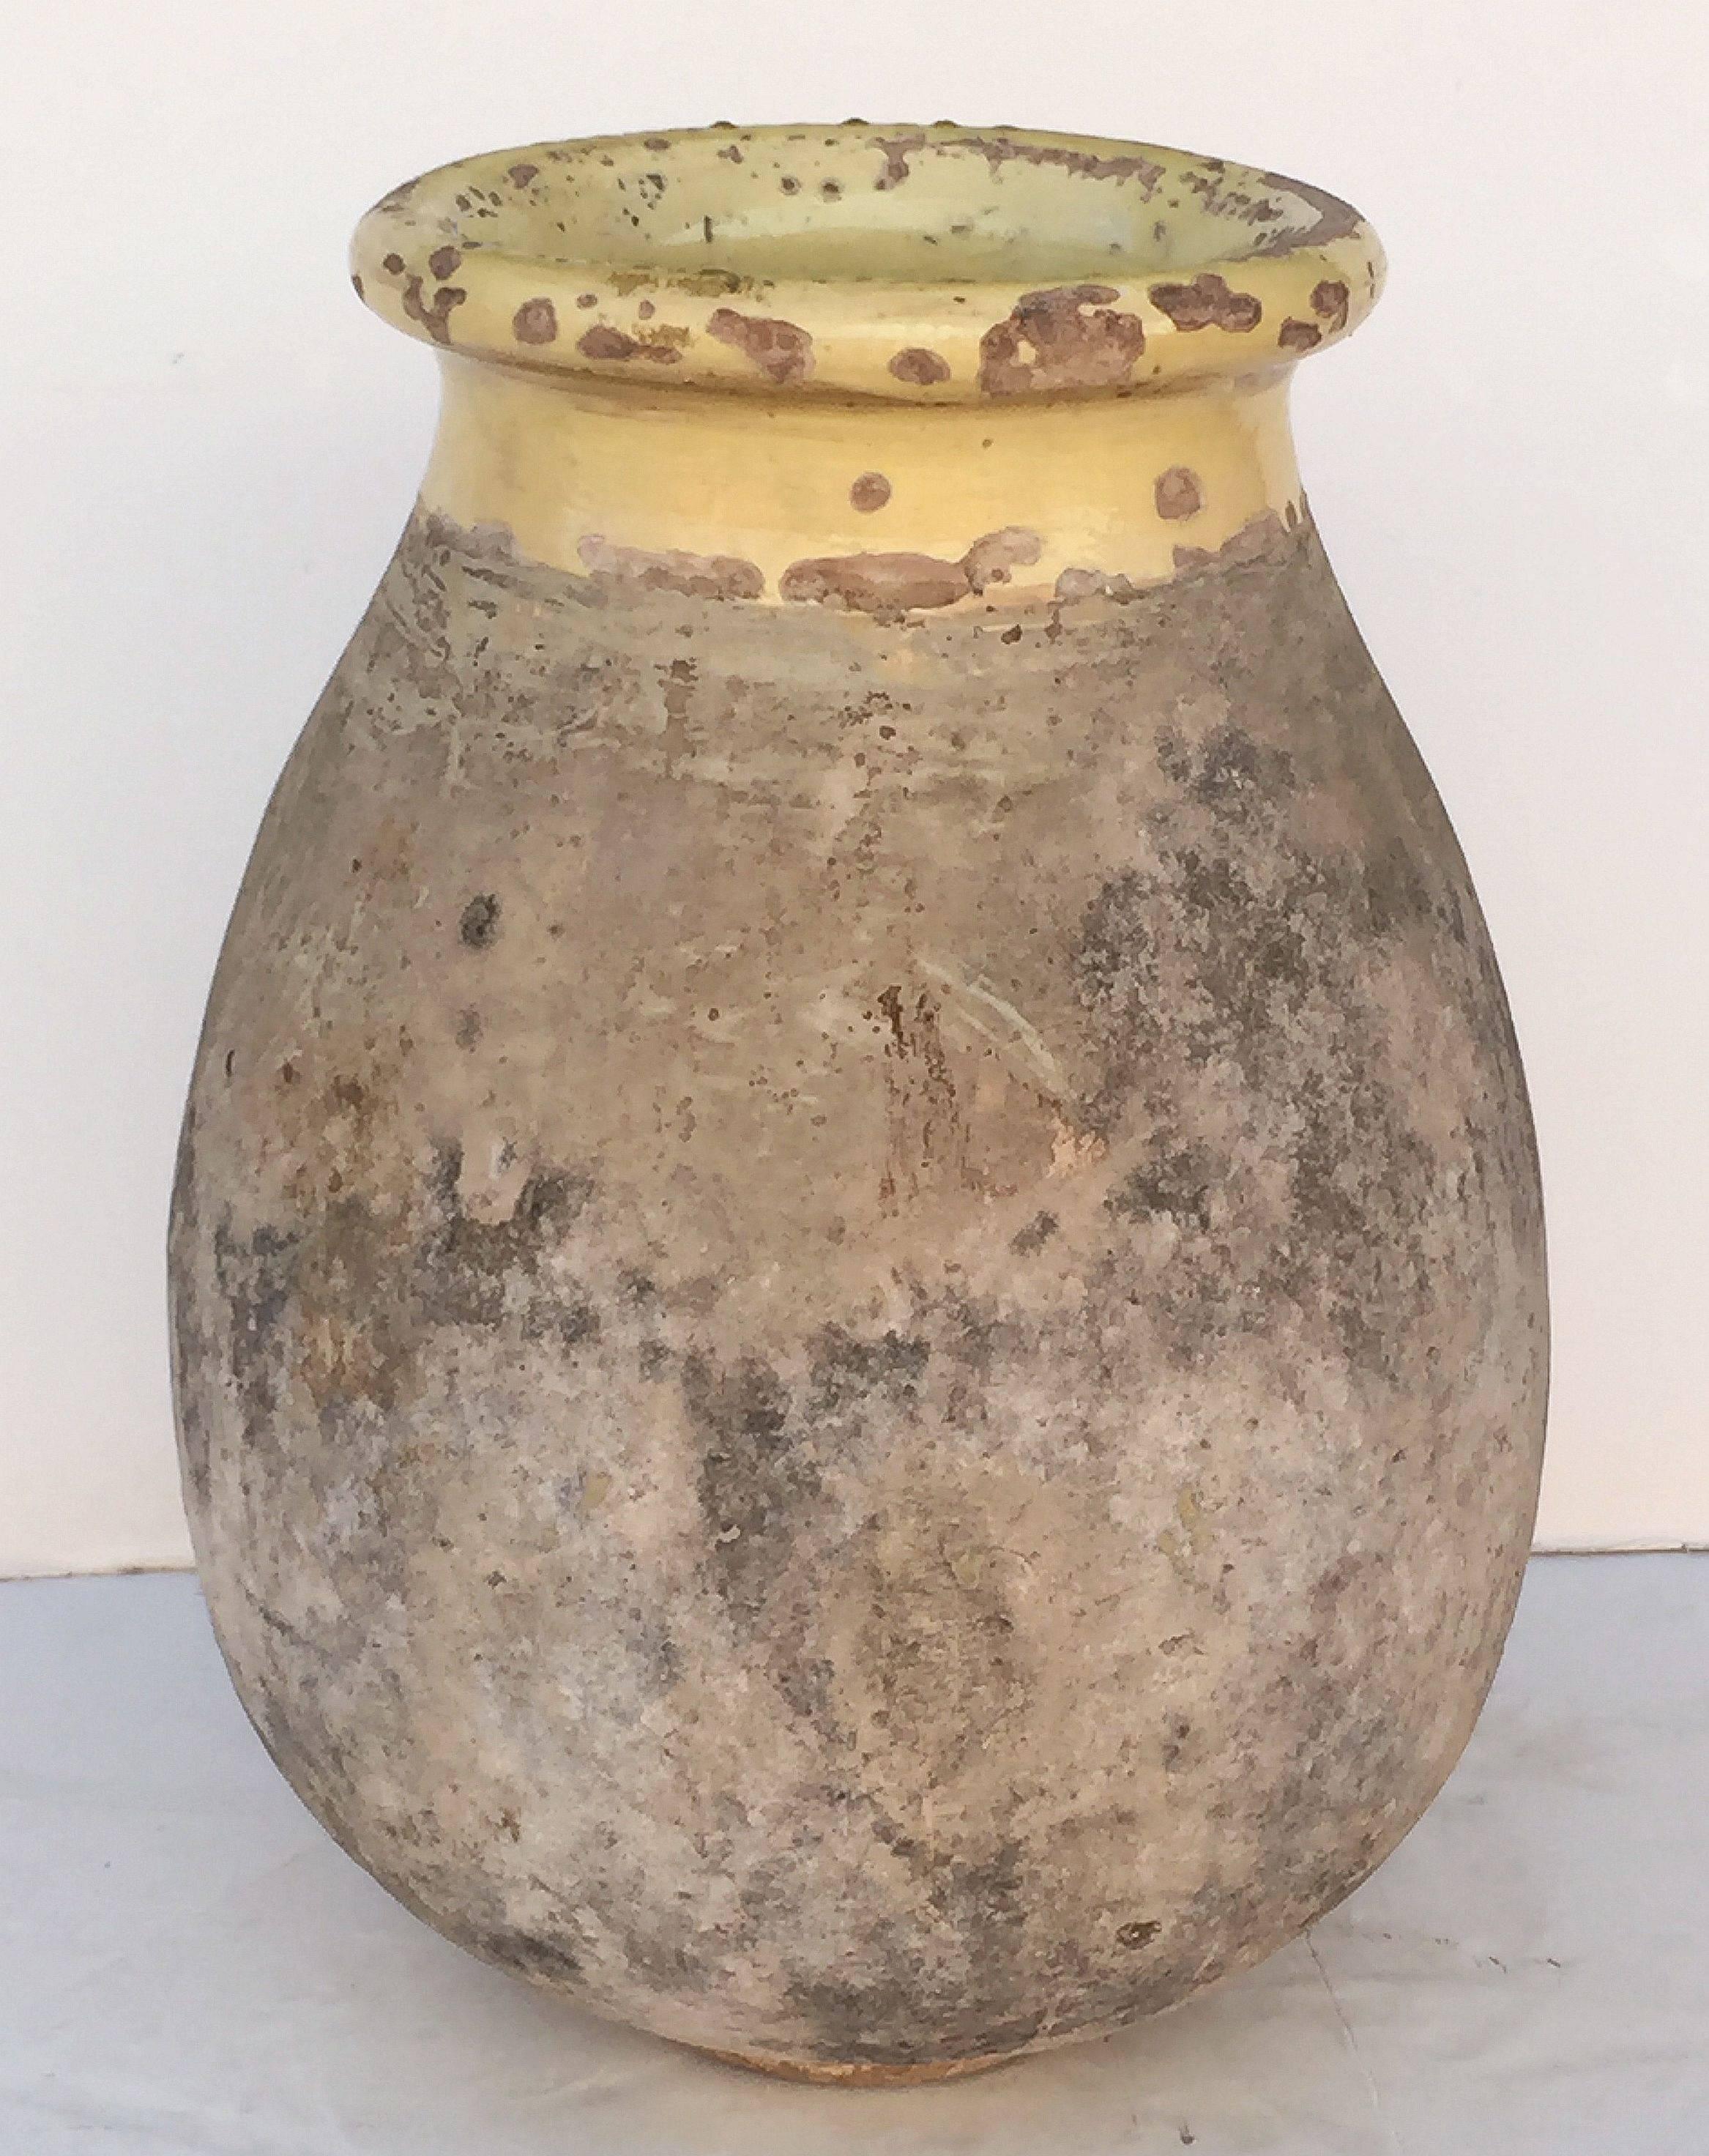 A handsome French garden pot or oil jar from the Biot, Alpes-Maritimes, region known as a pottery center from the 18th Century onward.

Featuring a glazed rolled-edge top over a smooth, cylindrical body and functional as a garden ornament, fountain,